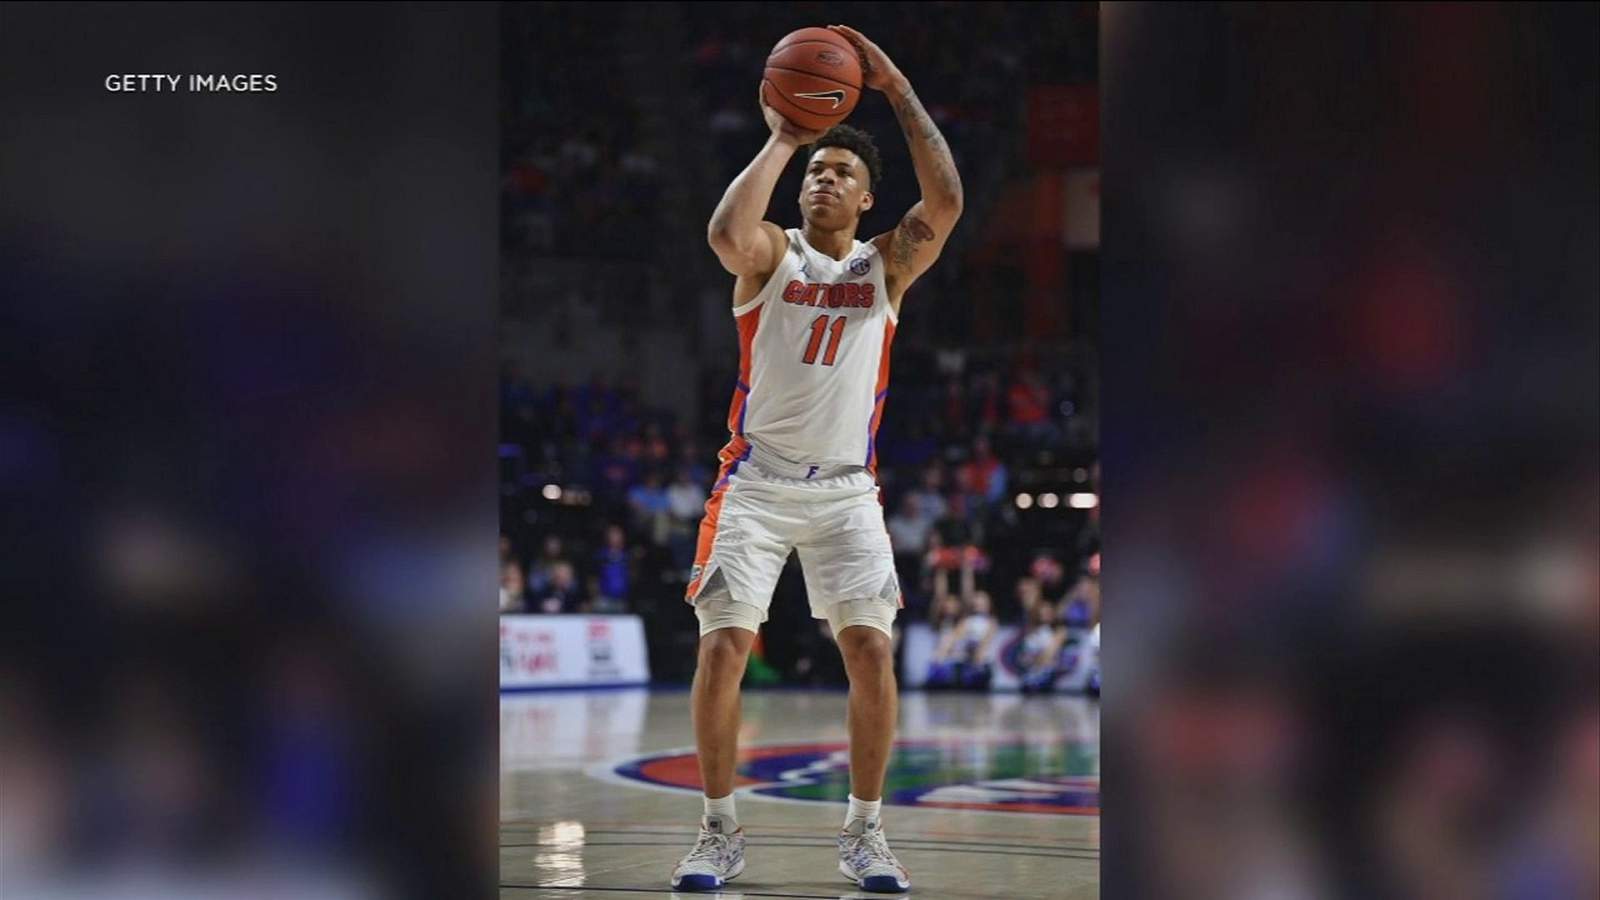 Parents: UF hoops player Johnson stable, improving after collapse